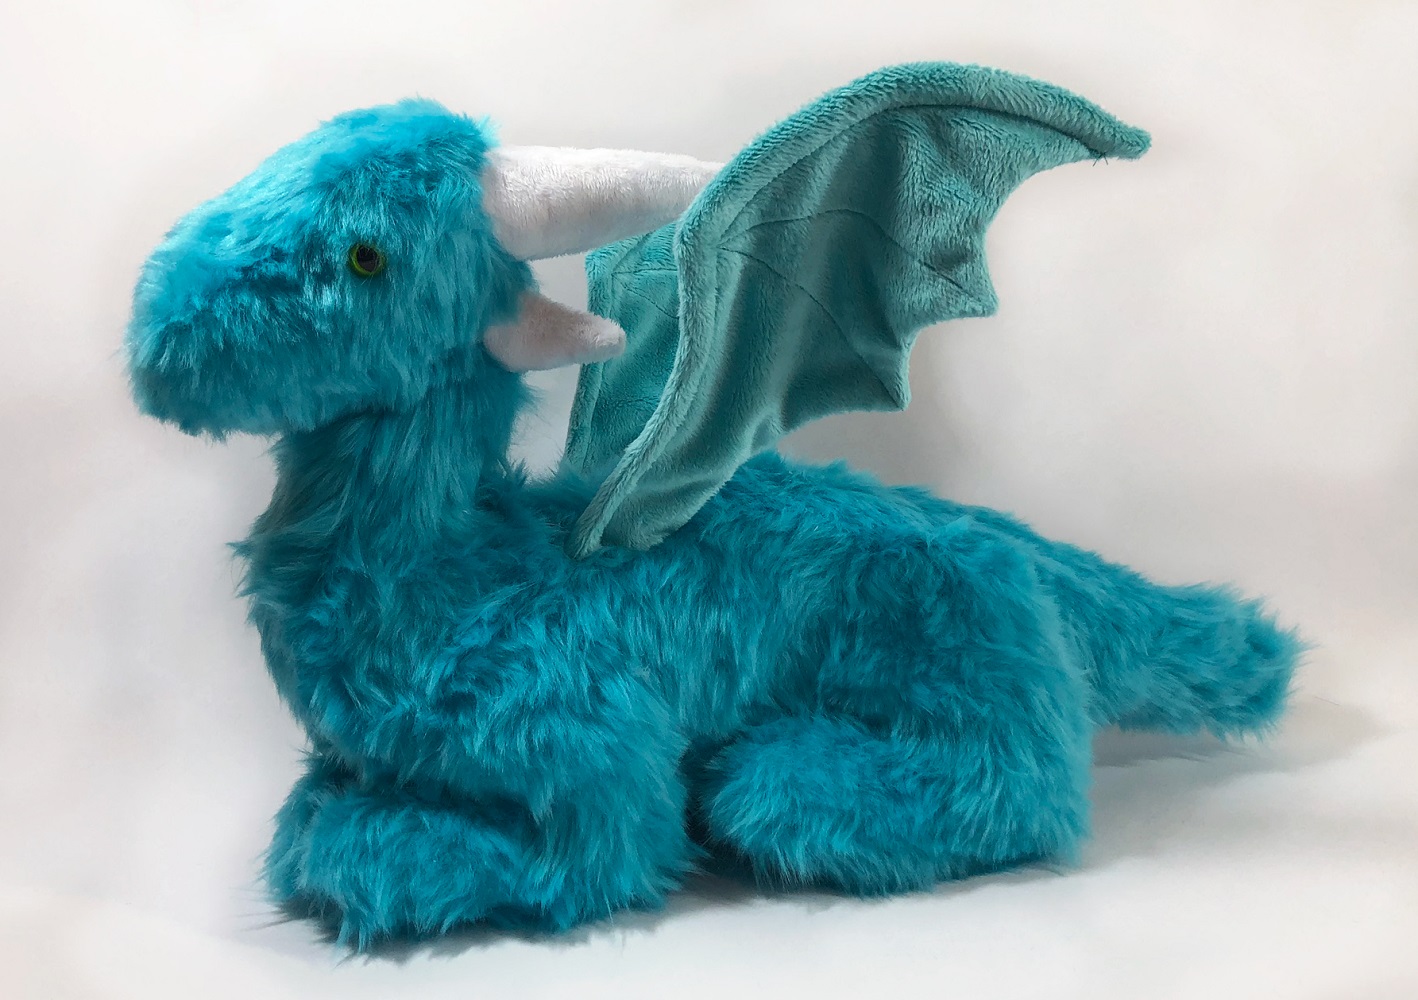 Teal faux fur dragon plush with wired wings.